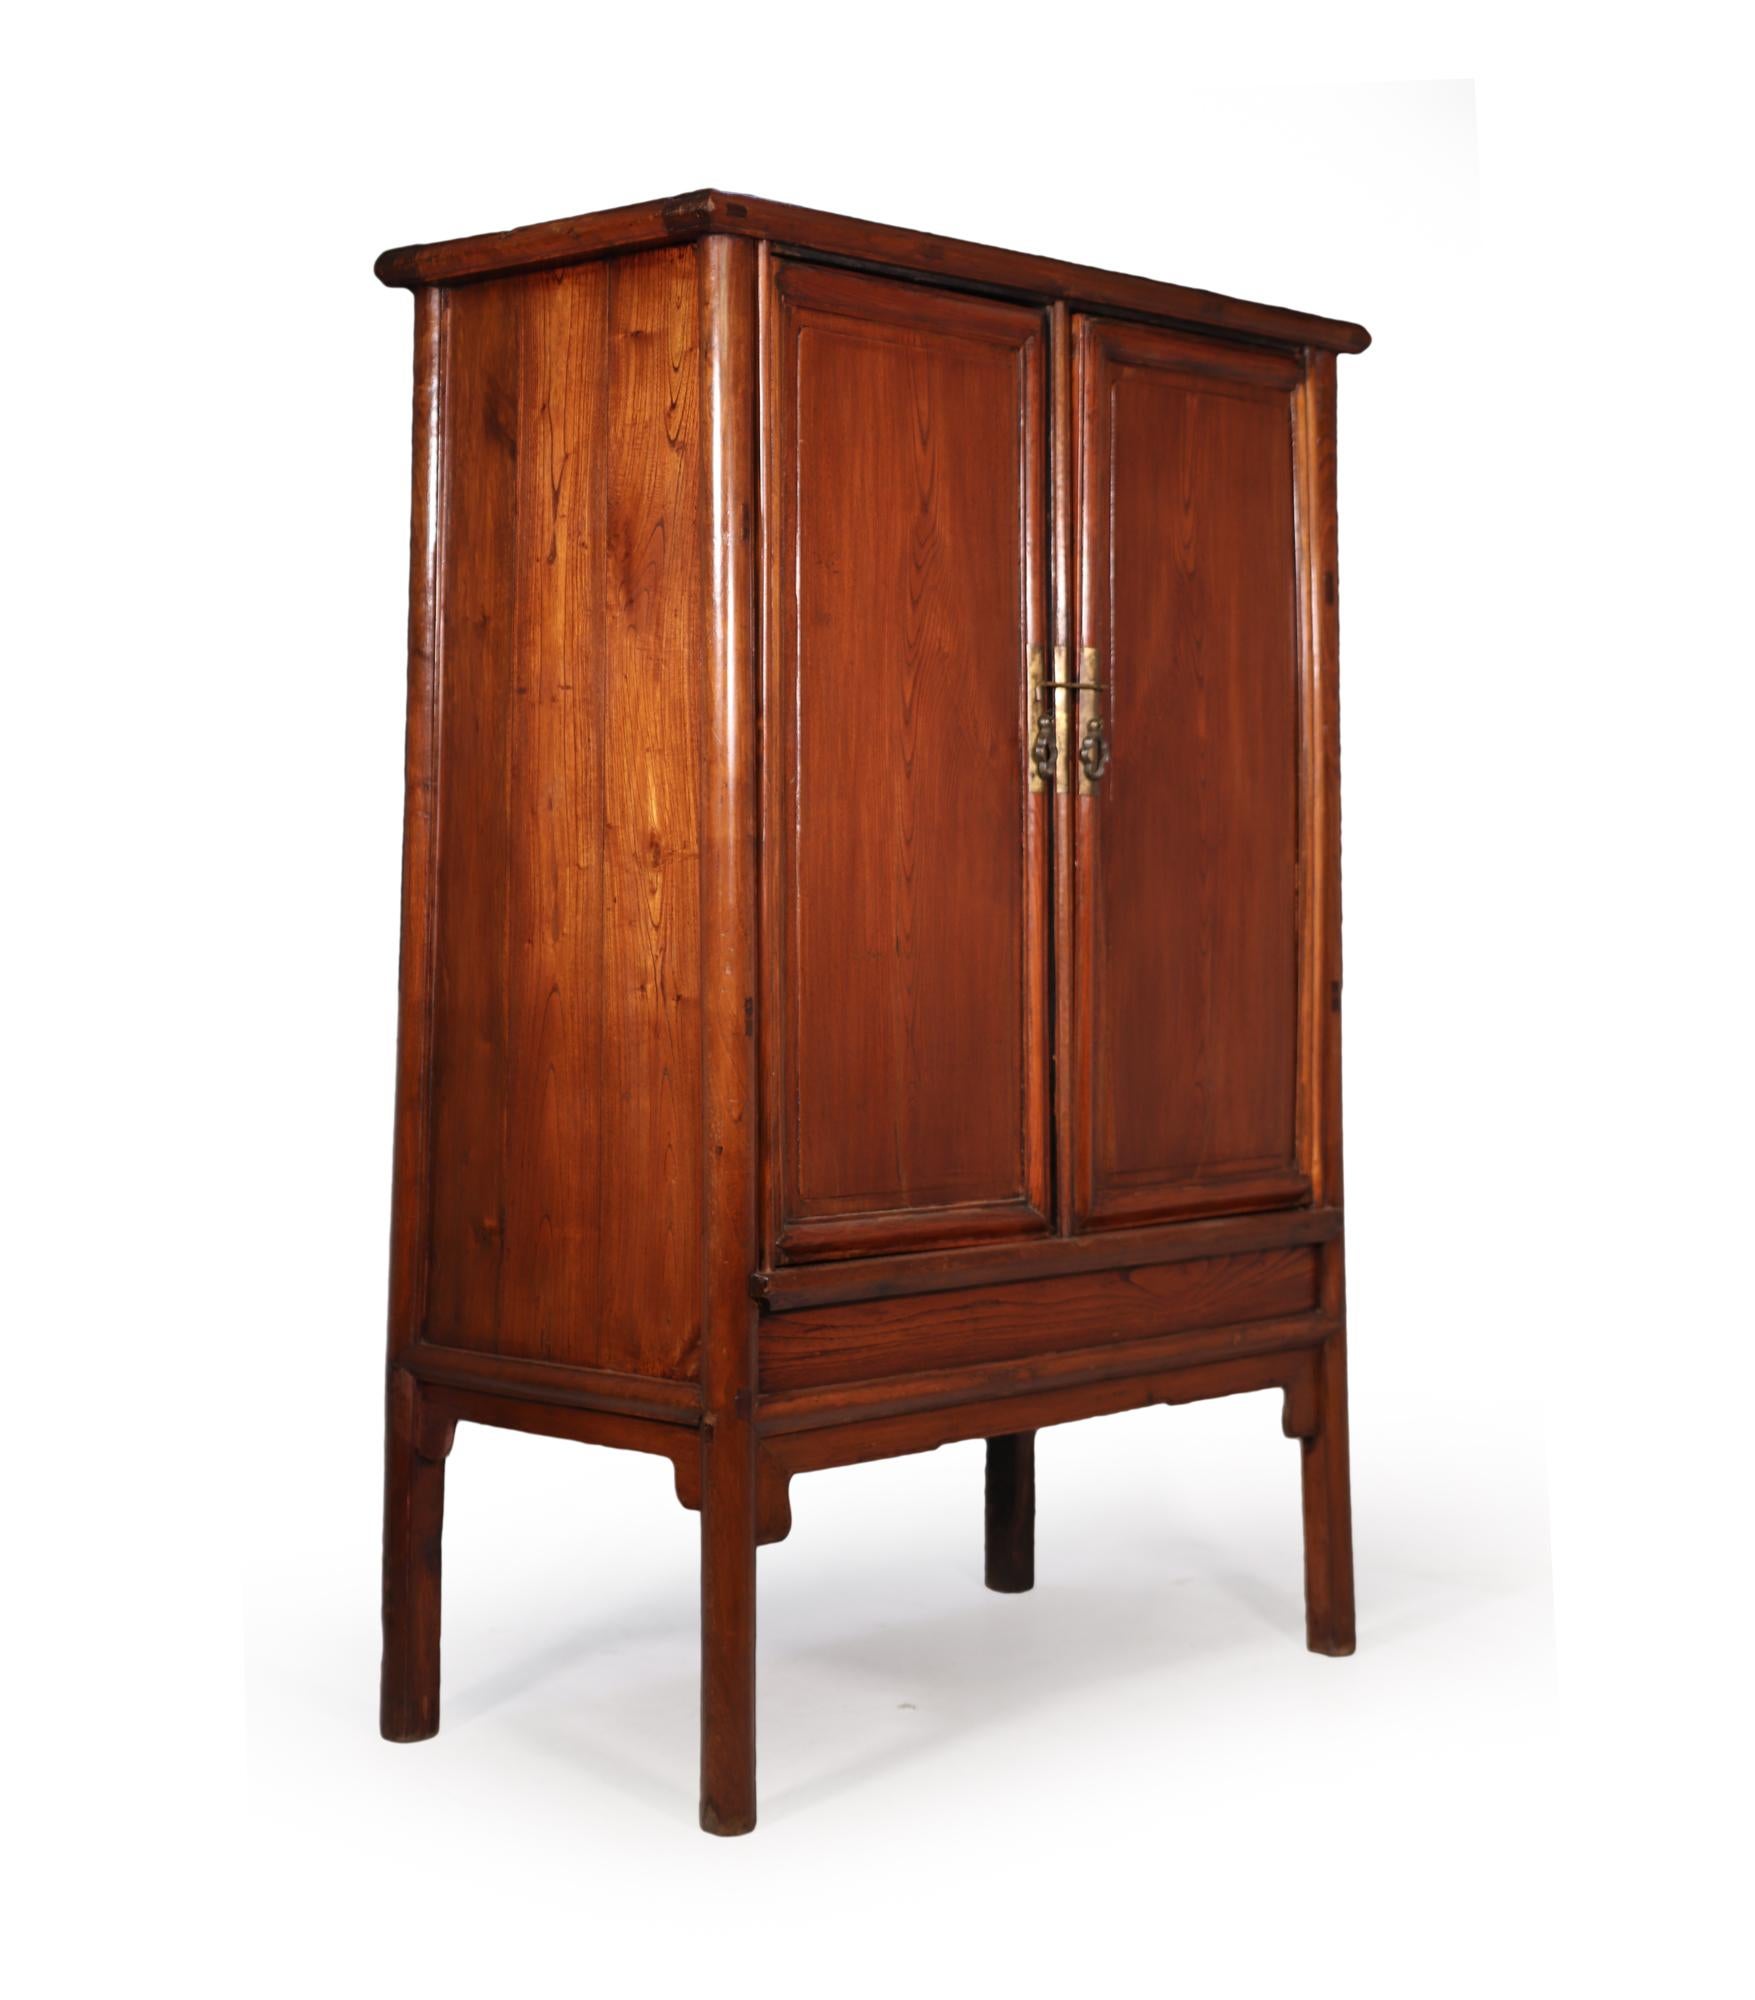 A very simple and plain Chinese round corner and tapered cabinet produced early 18th century from mixed hardwoods, with later restorations and repairs the center drawers inside are not original to this cabinet but can be removed as it is not fixed.